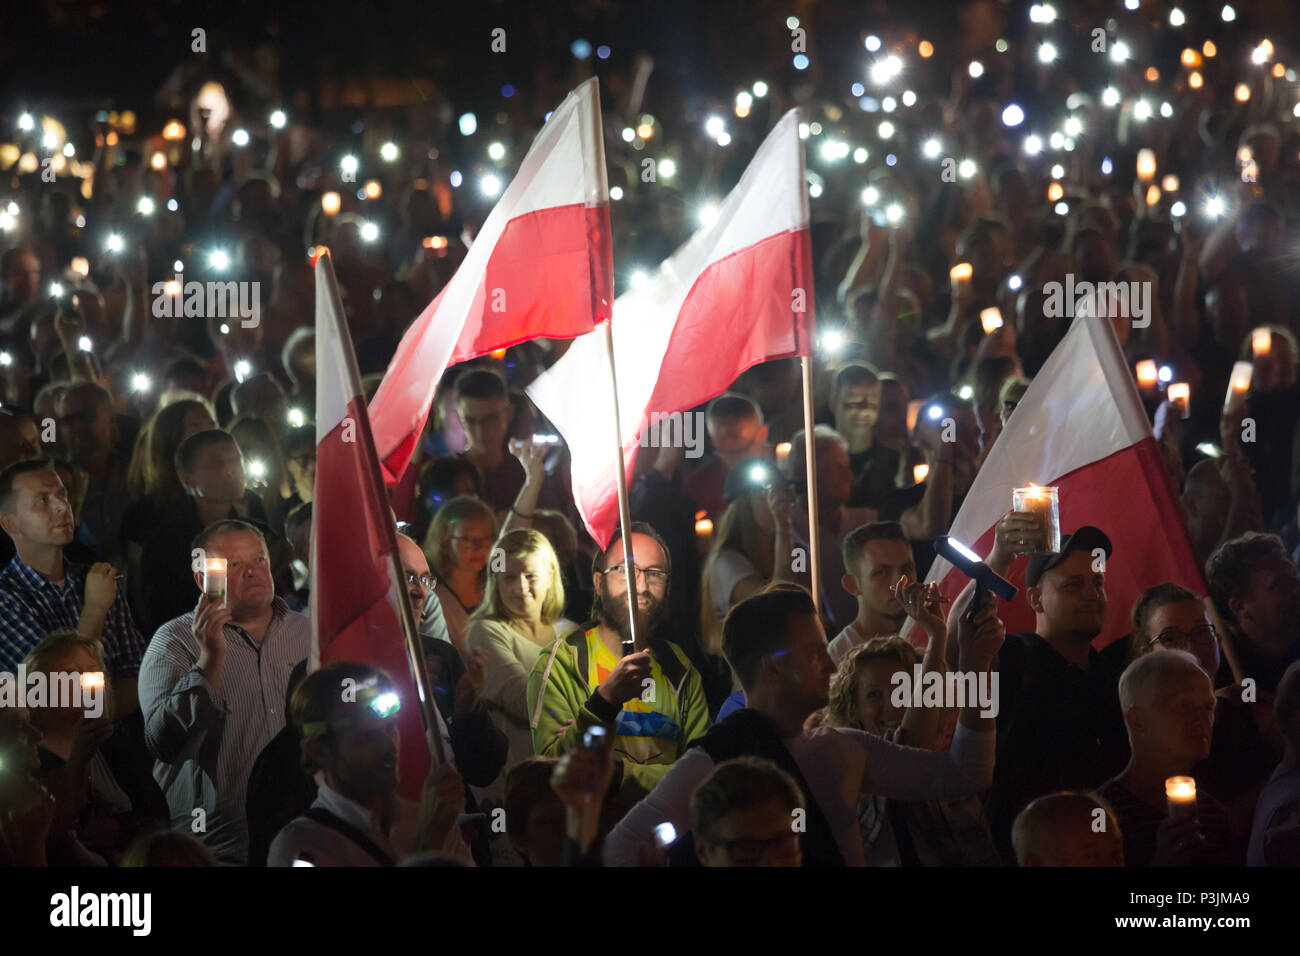 Demonstration against the equalization of justice by the PIS government under the motto LANCUCH SWIATLA (fairy lights) Stock Photo